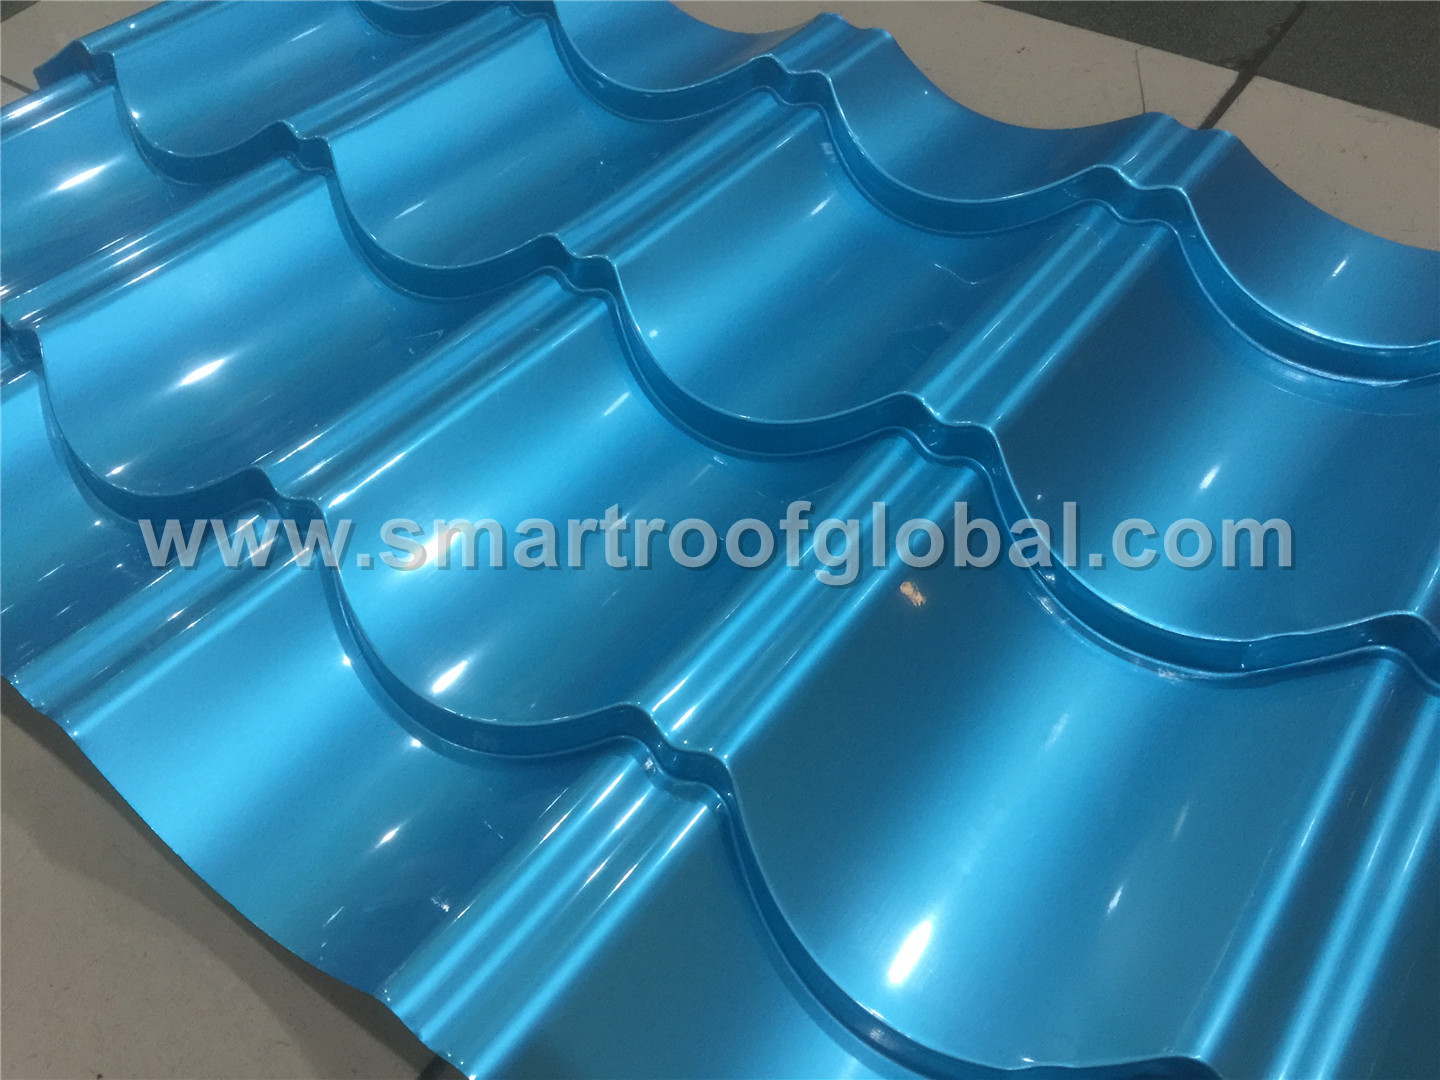 2019 Good Quality Galvanized Corrugated Metal Roofing - Steel Metal Roofing – Smartroof